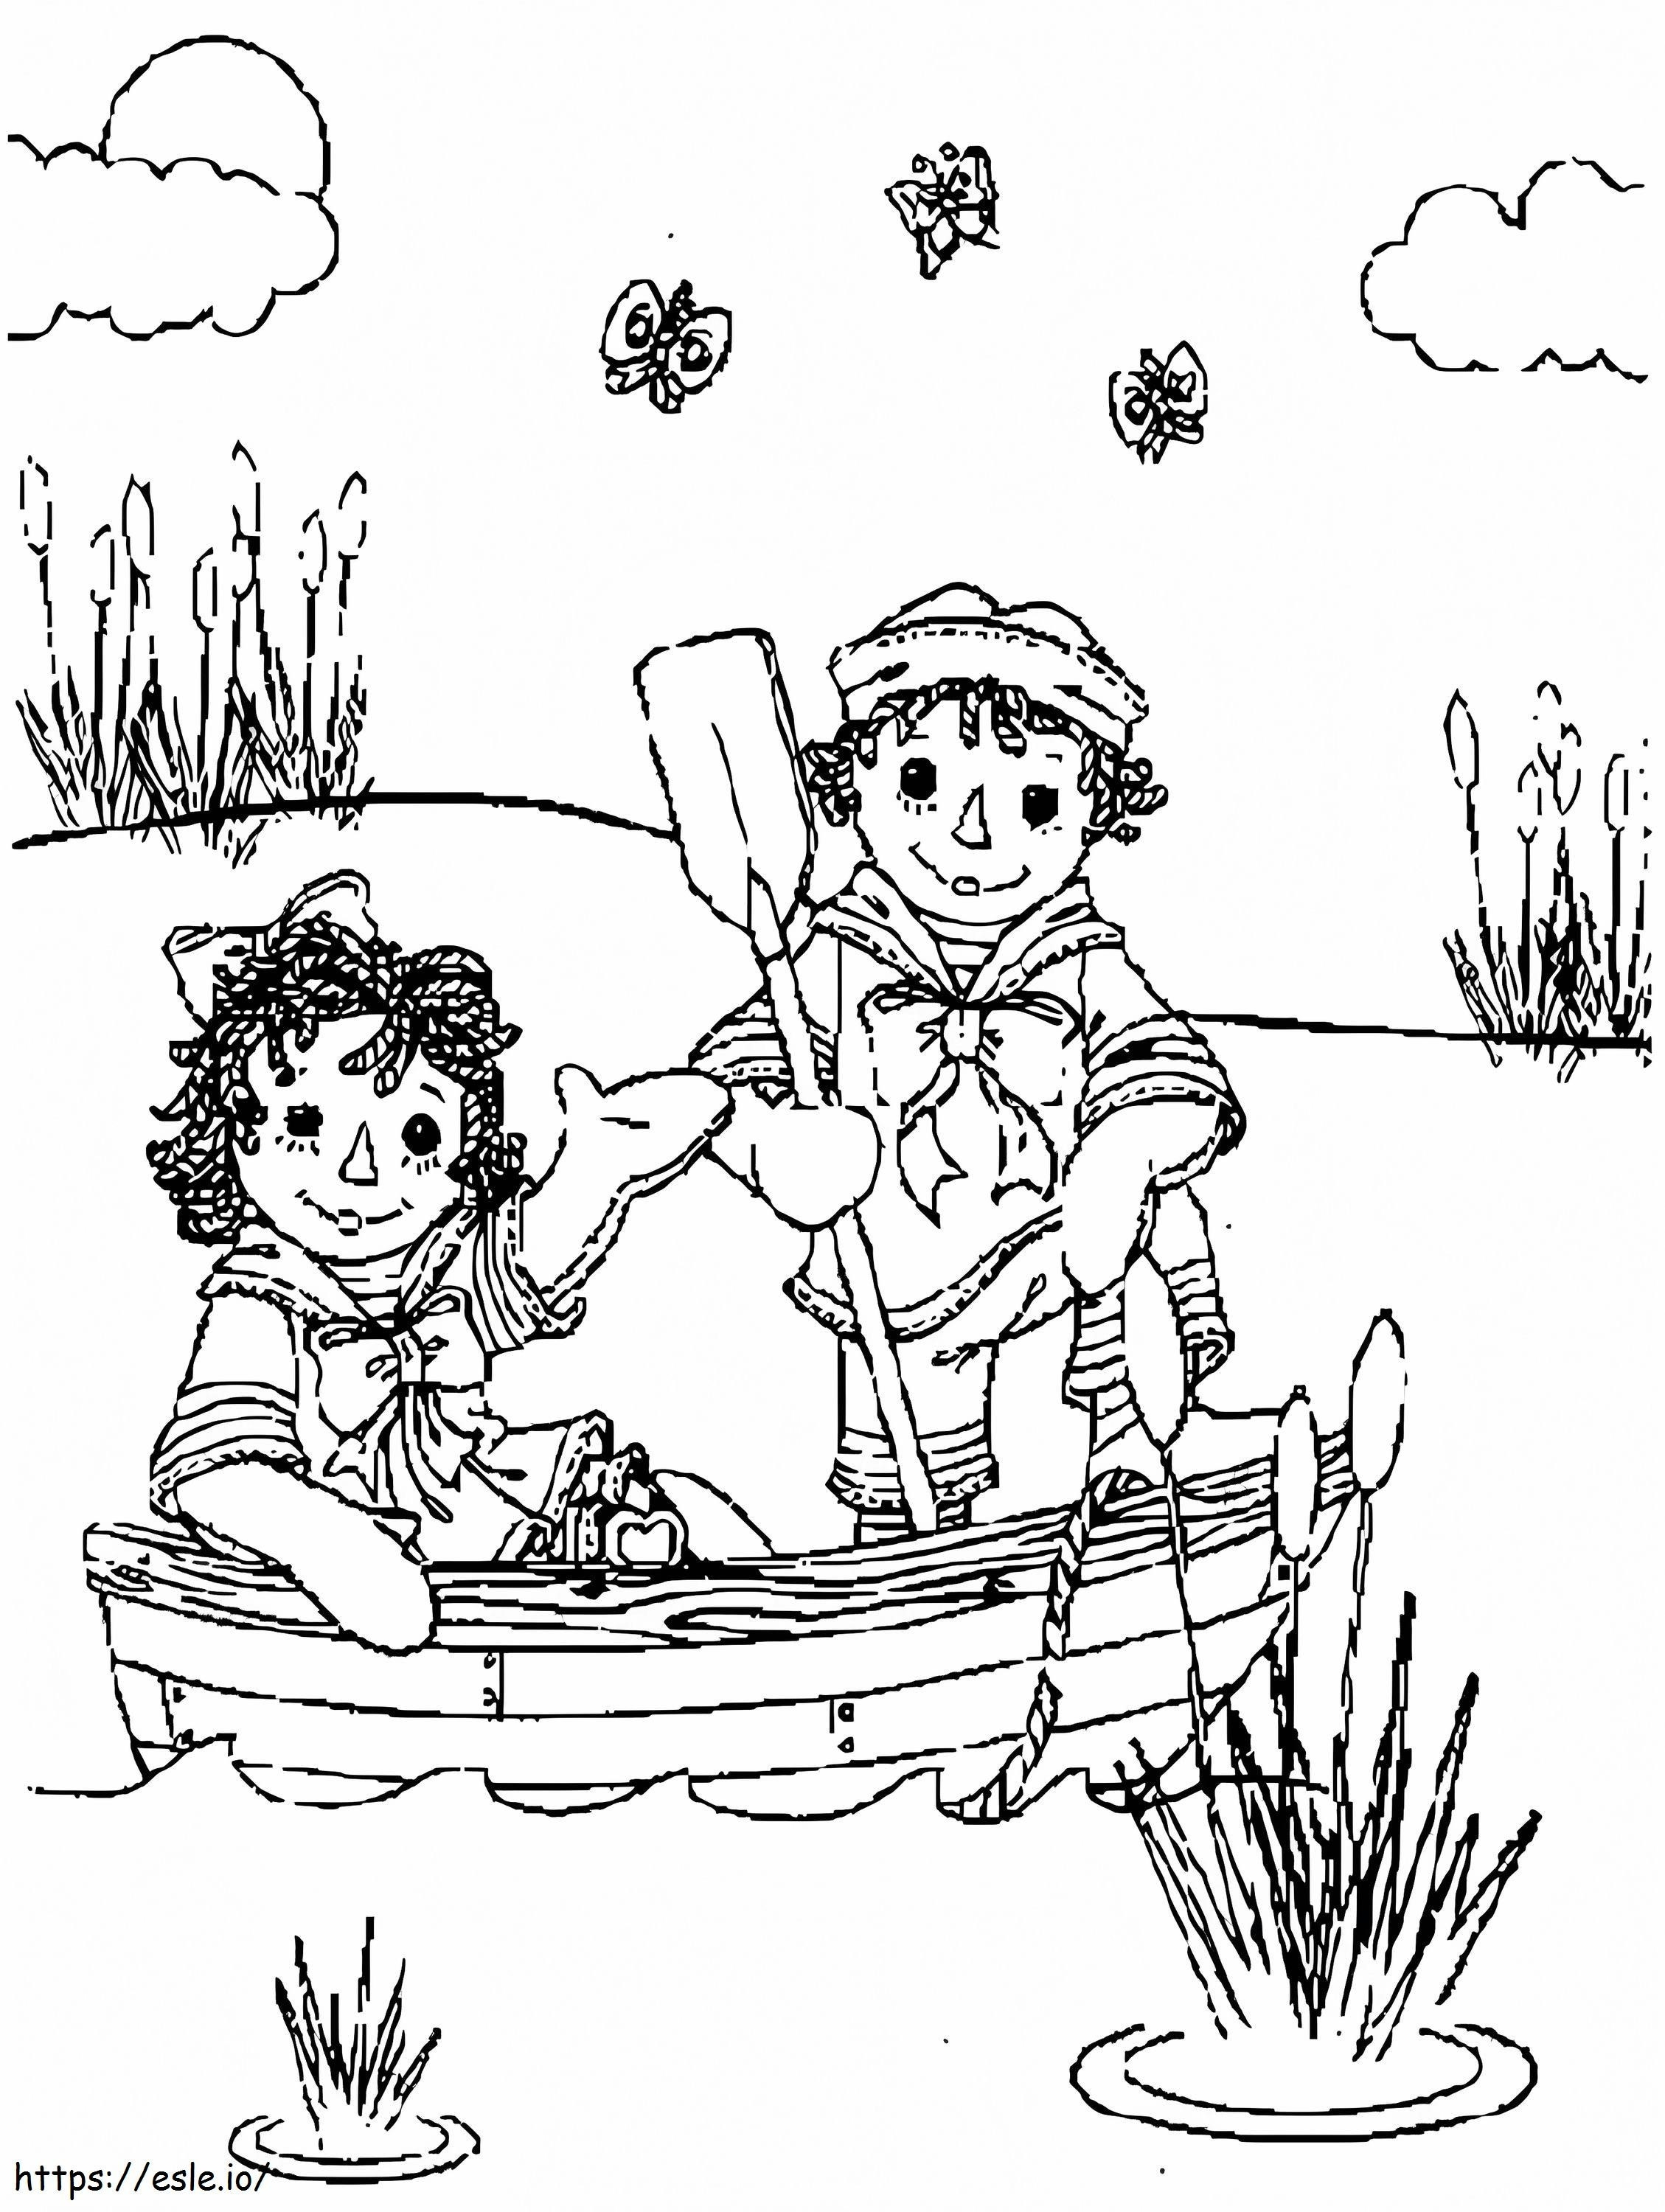 Raggedy Ann And Andy On Boat coloring page